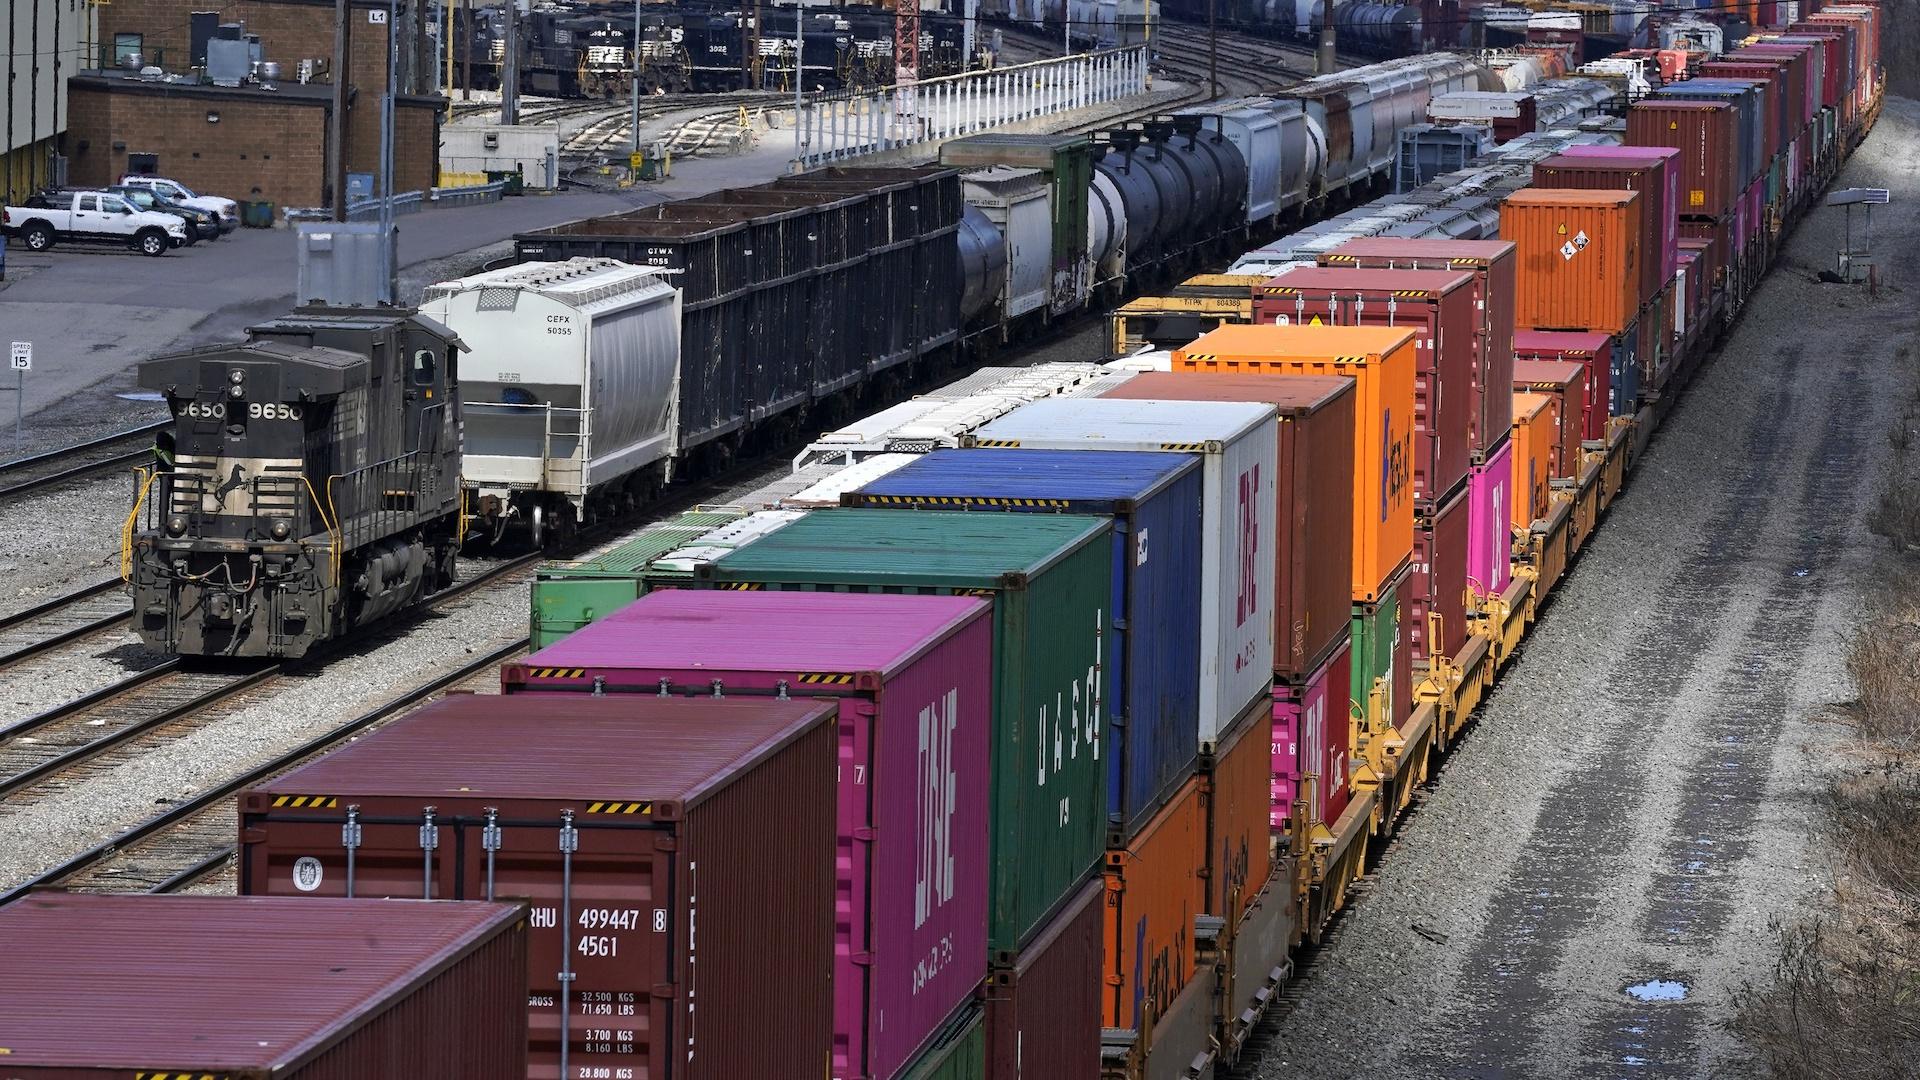 This April 2, 2021, file photo shows freight train cars and containers at Norfolk Southern Railroad's Conway Yard in Conway, Pa. Railroad engineers accepted their deal with the railroads that will deliver 24% raises but conductors rejected the contract casting more doubt on whether the industry will be able to resolve the labor dispute before next month’s deadline without Congress’ help. (AP Photo/Gene J. Puskar, File)